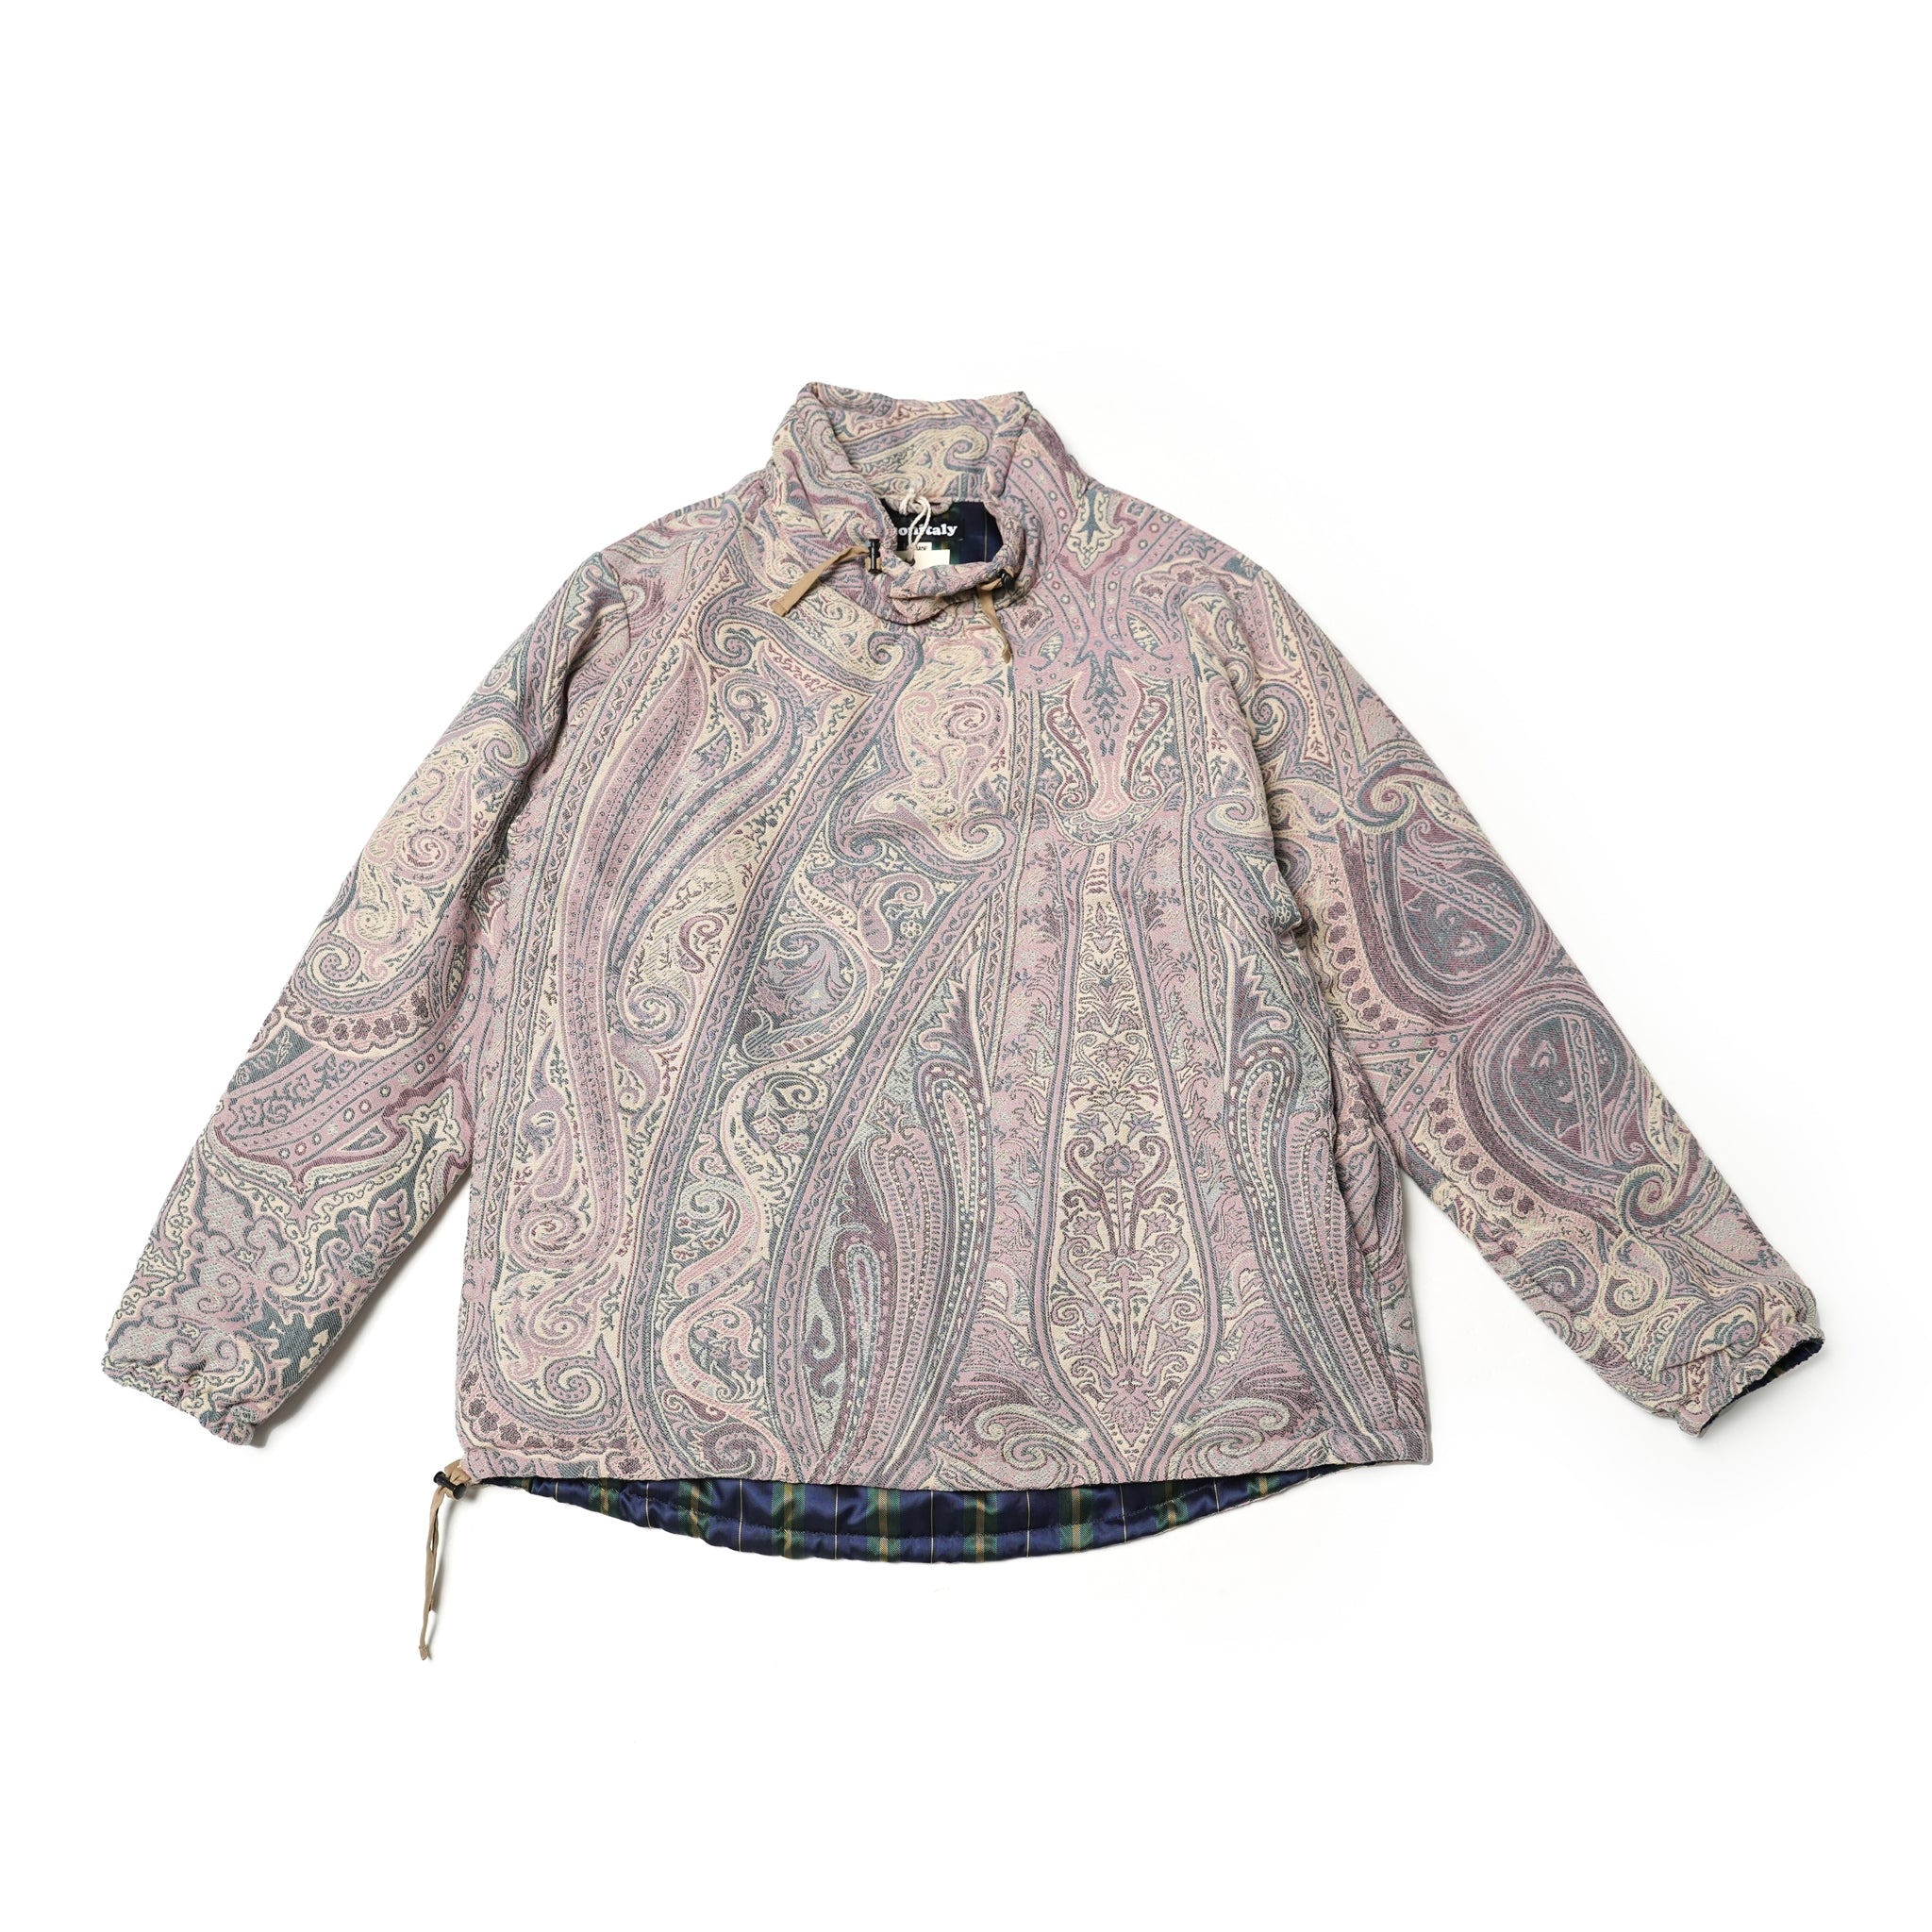 No:M32503 | Name:Insulated Mock Neck Pullover | Color:Betro Paisley Pi